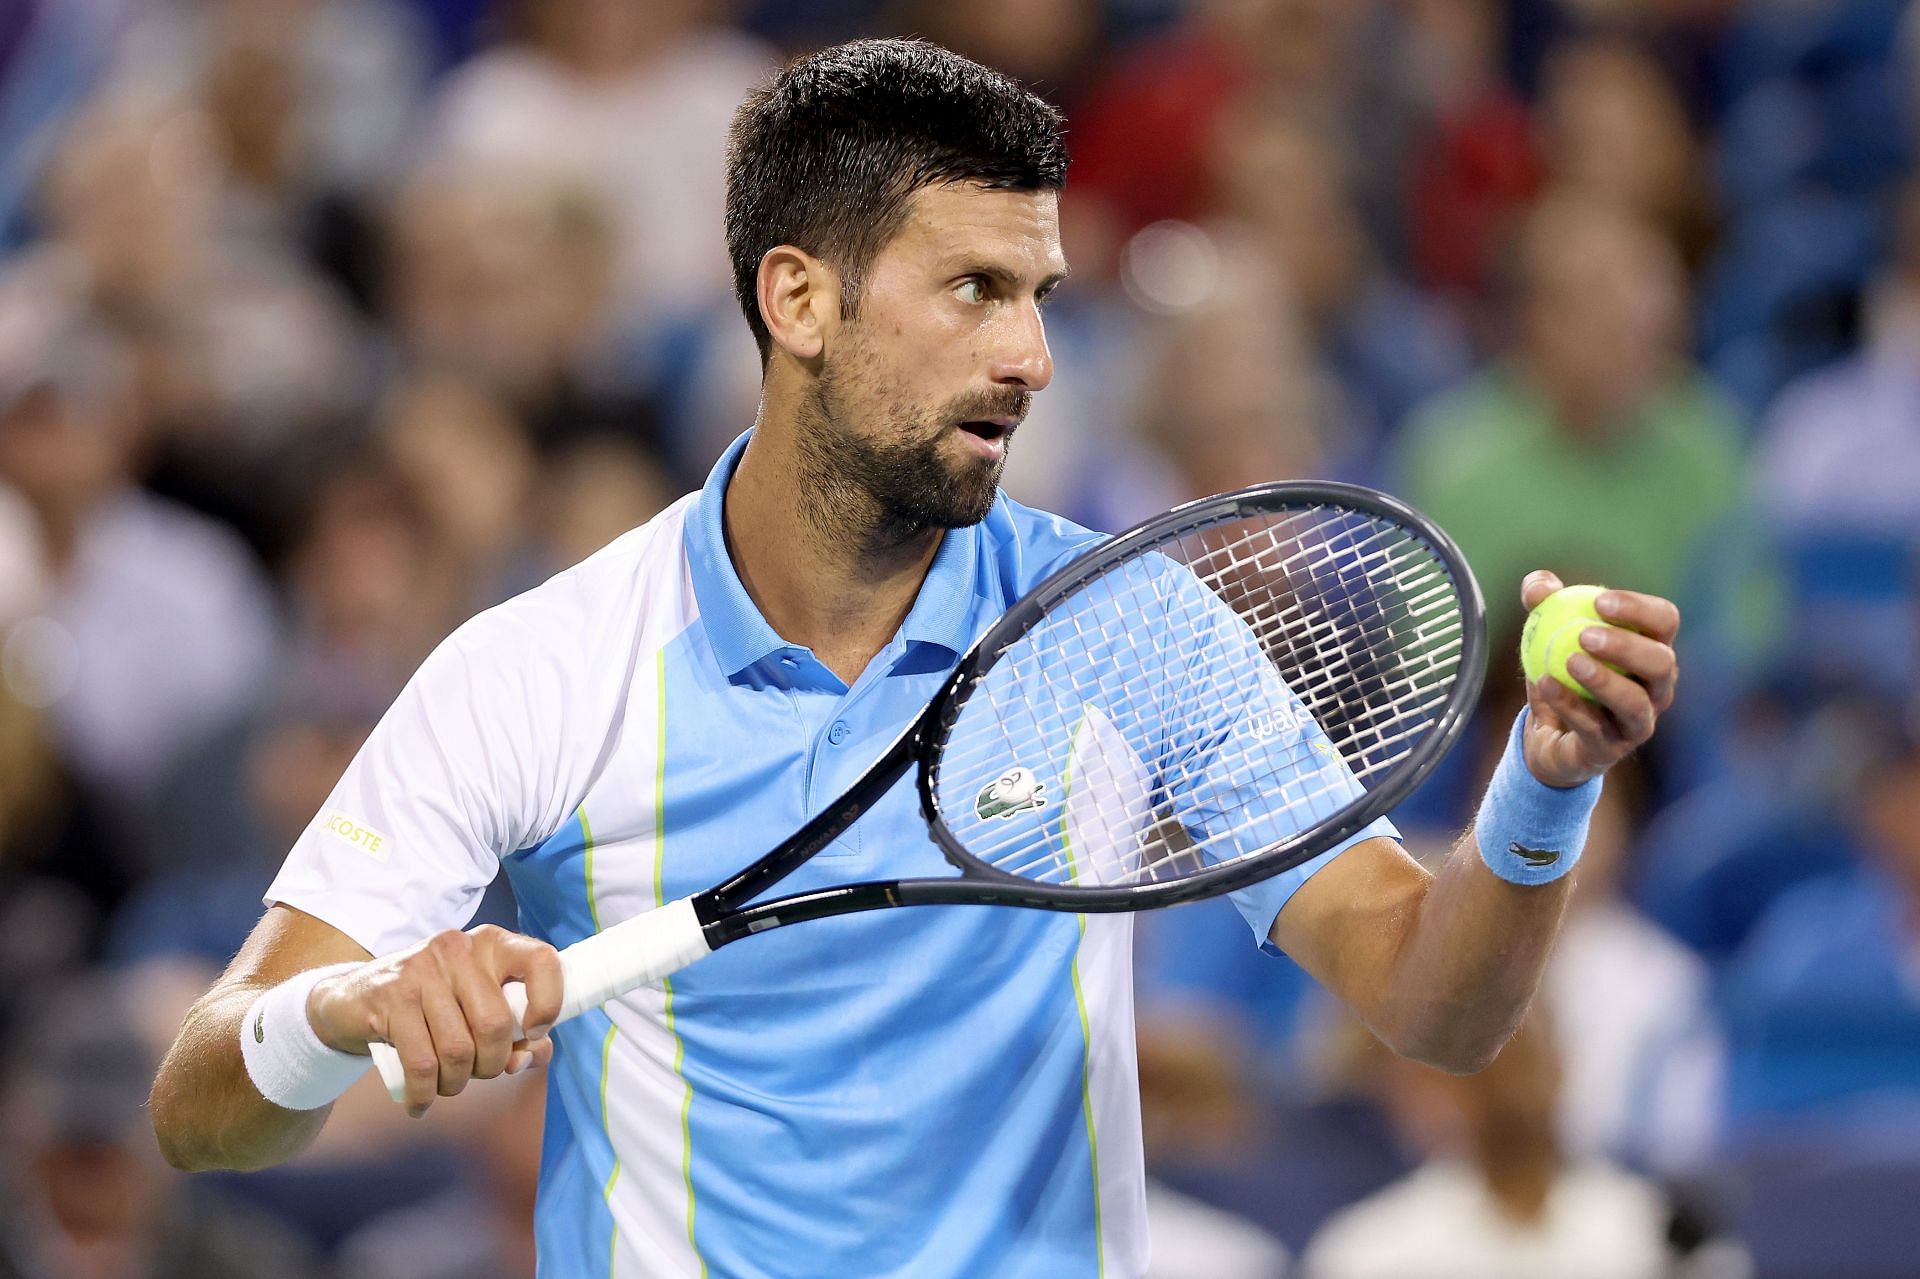 Gritty Novak Djokovic overcomes Monfils after saving 3 consecutive match  points - Tennis Tonic - News, Predictions, H2H, Live Scores, stats